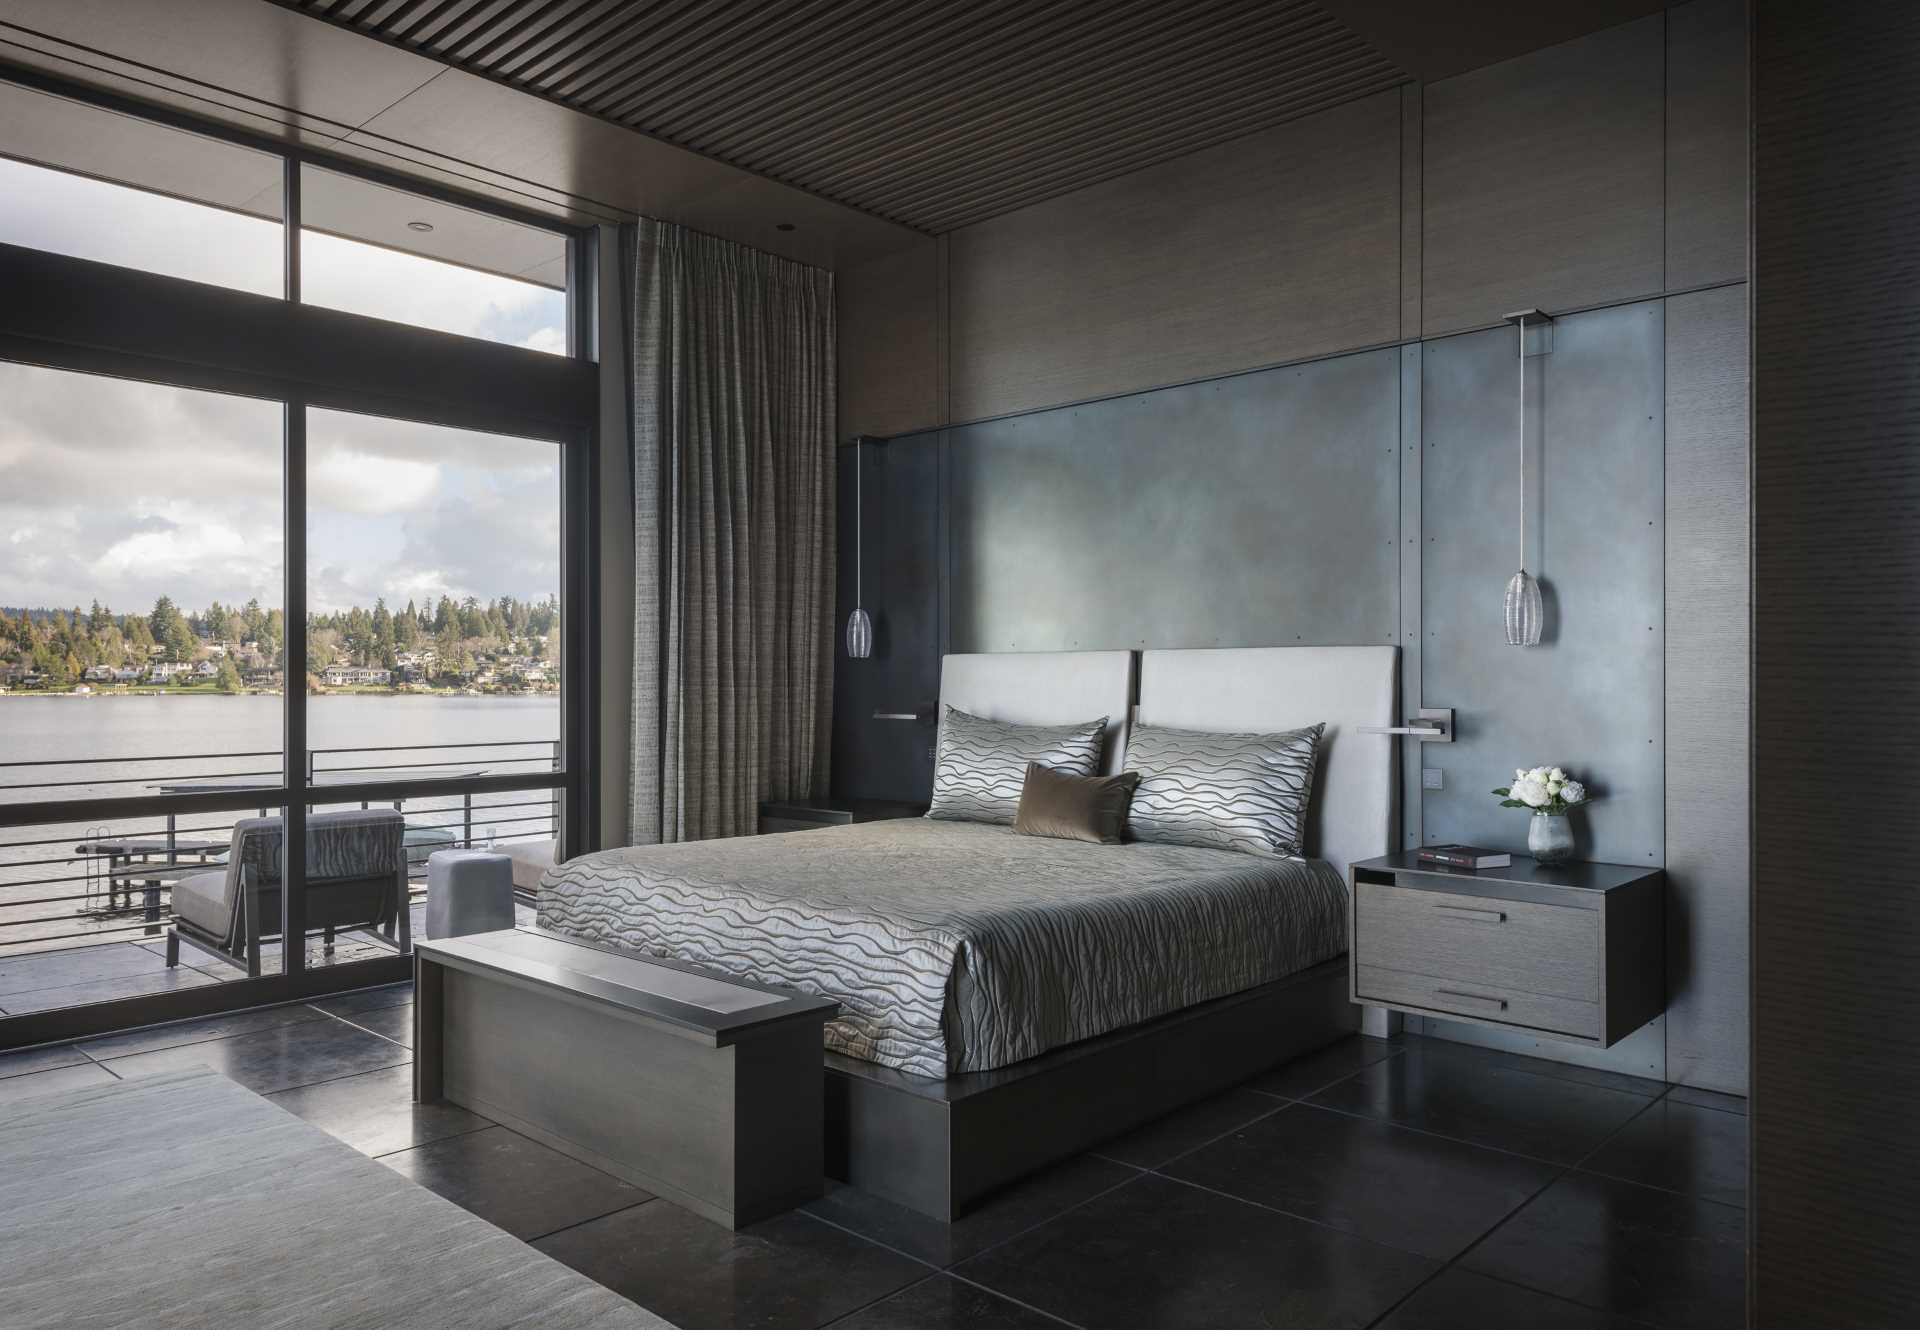 In this modern bedroom, a steel and wood accent wall acts as a backdrop for the bed.